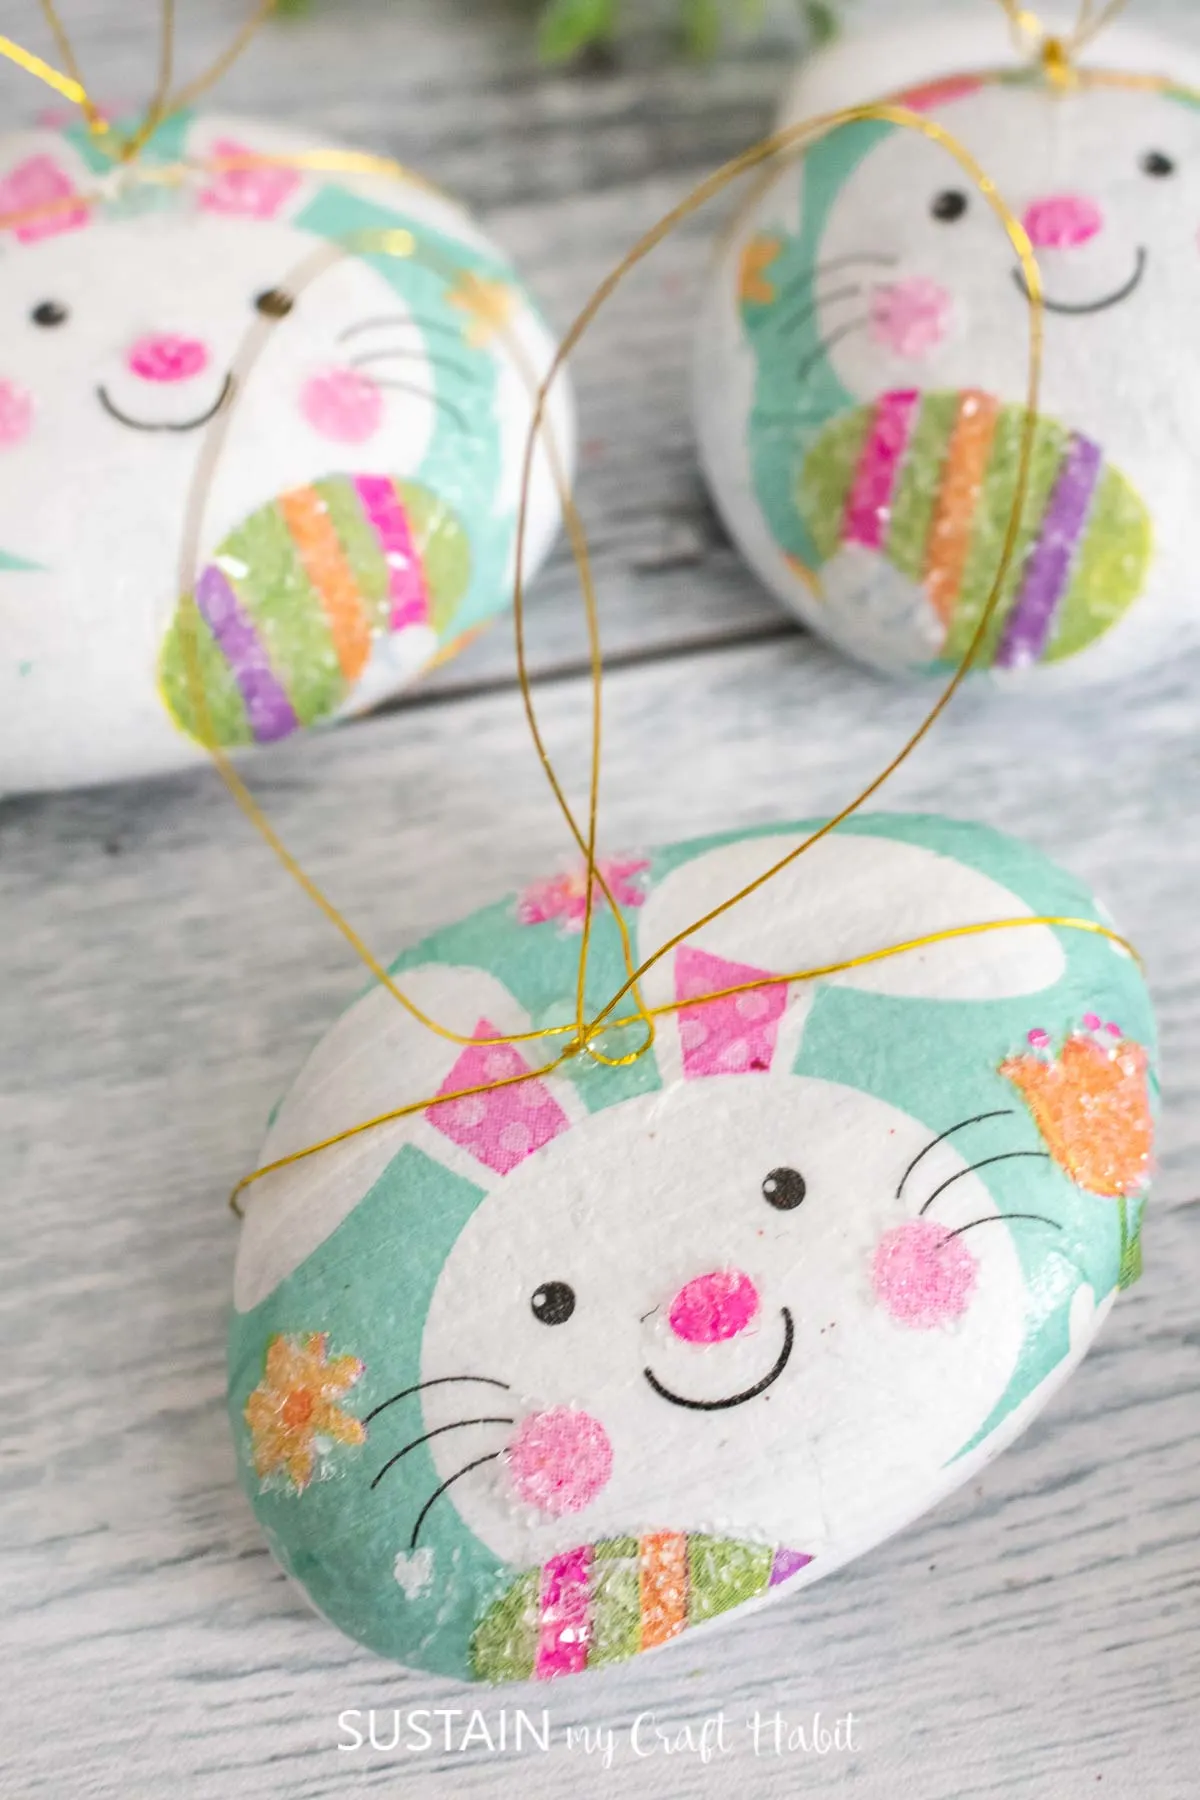 Easter Crafts for Kids That Are Easy and Fun! - Mod Podge Rocks